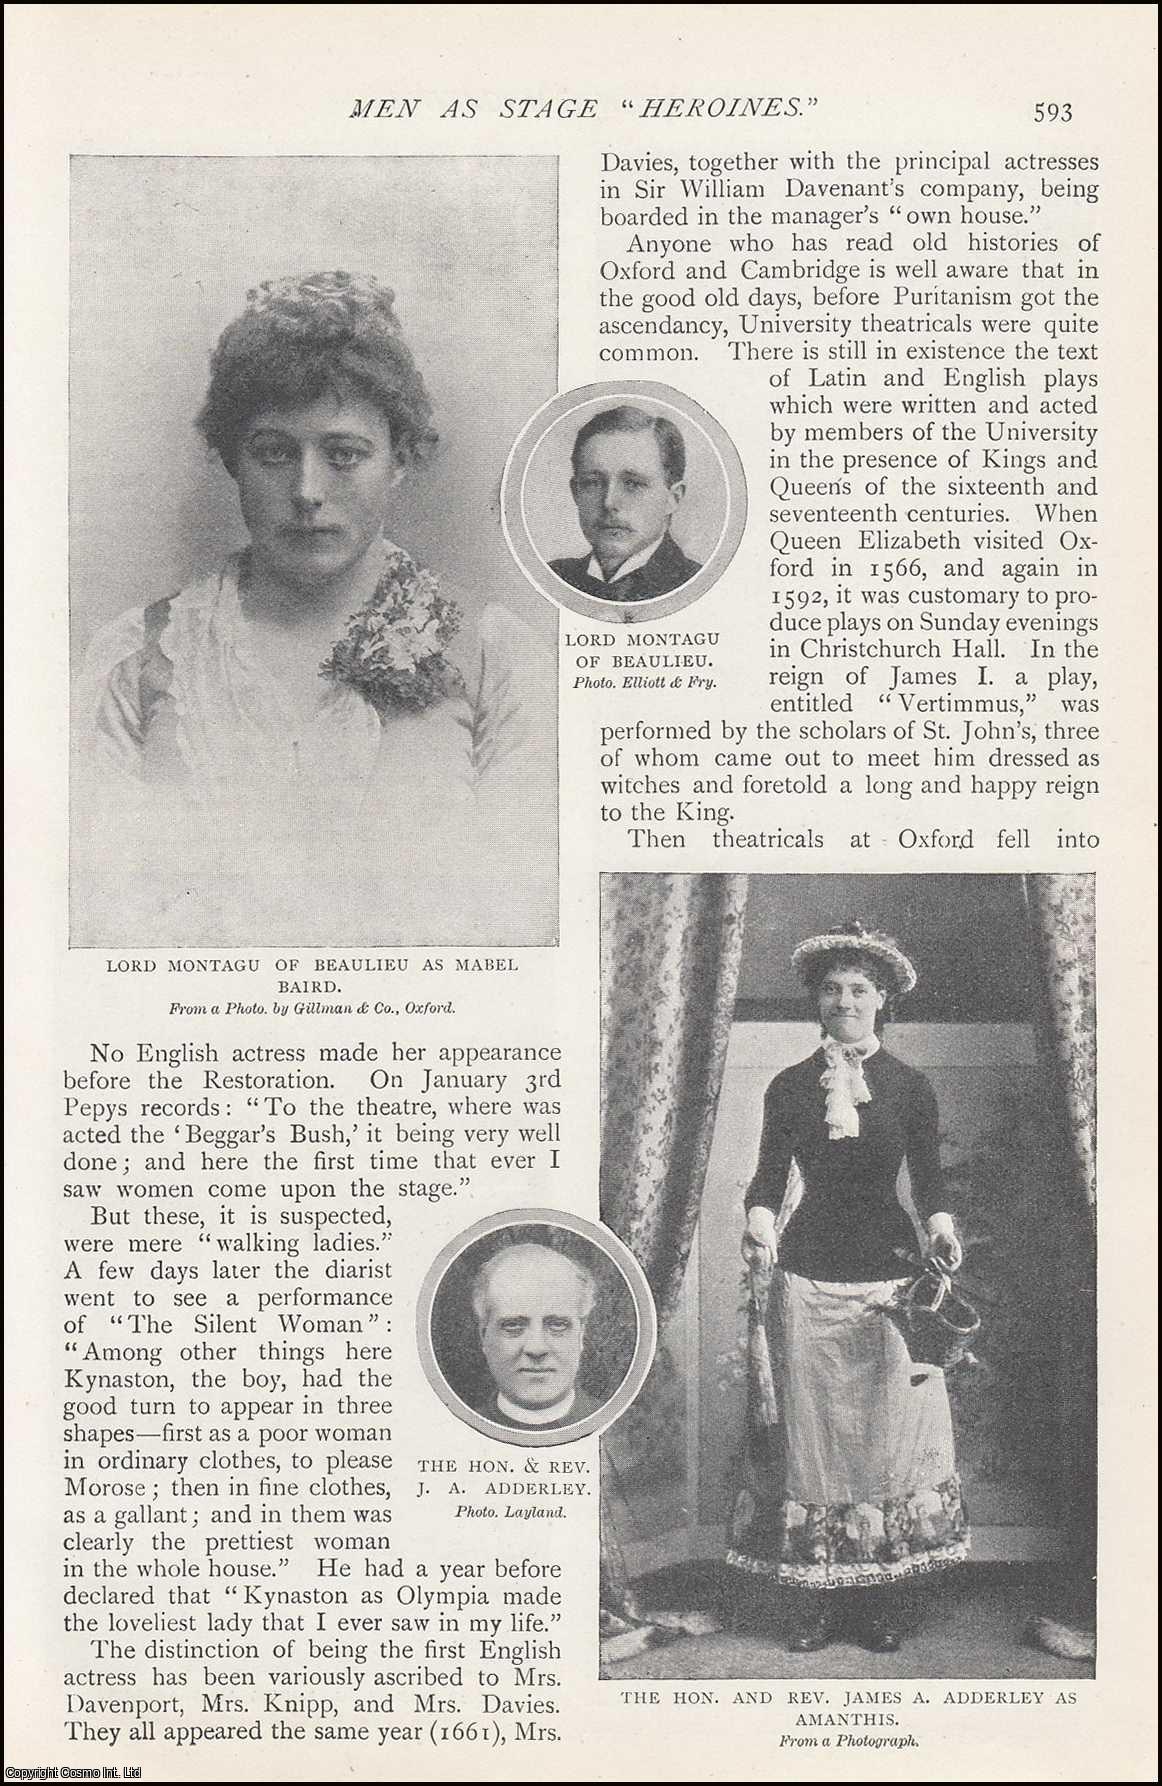 --- - Men as Stage Heroines. Lineal Descendants of Shakespeare's Portia and Ophelia. A rare original article from The Strand Magazine, 1909.